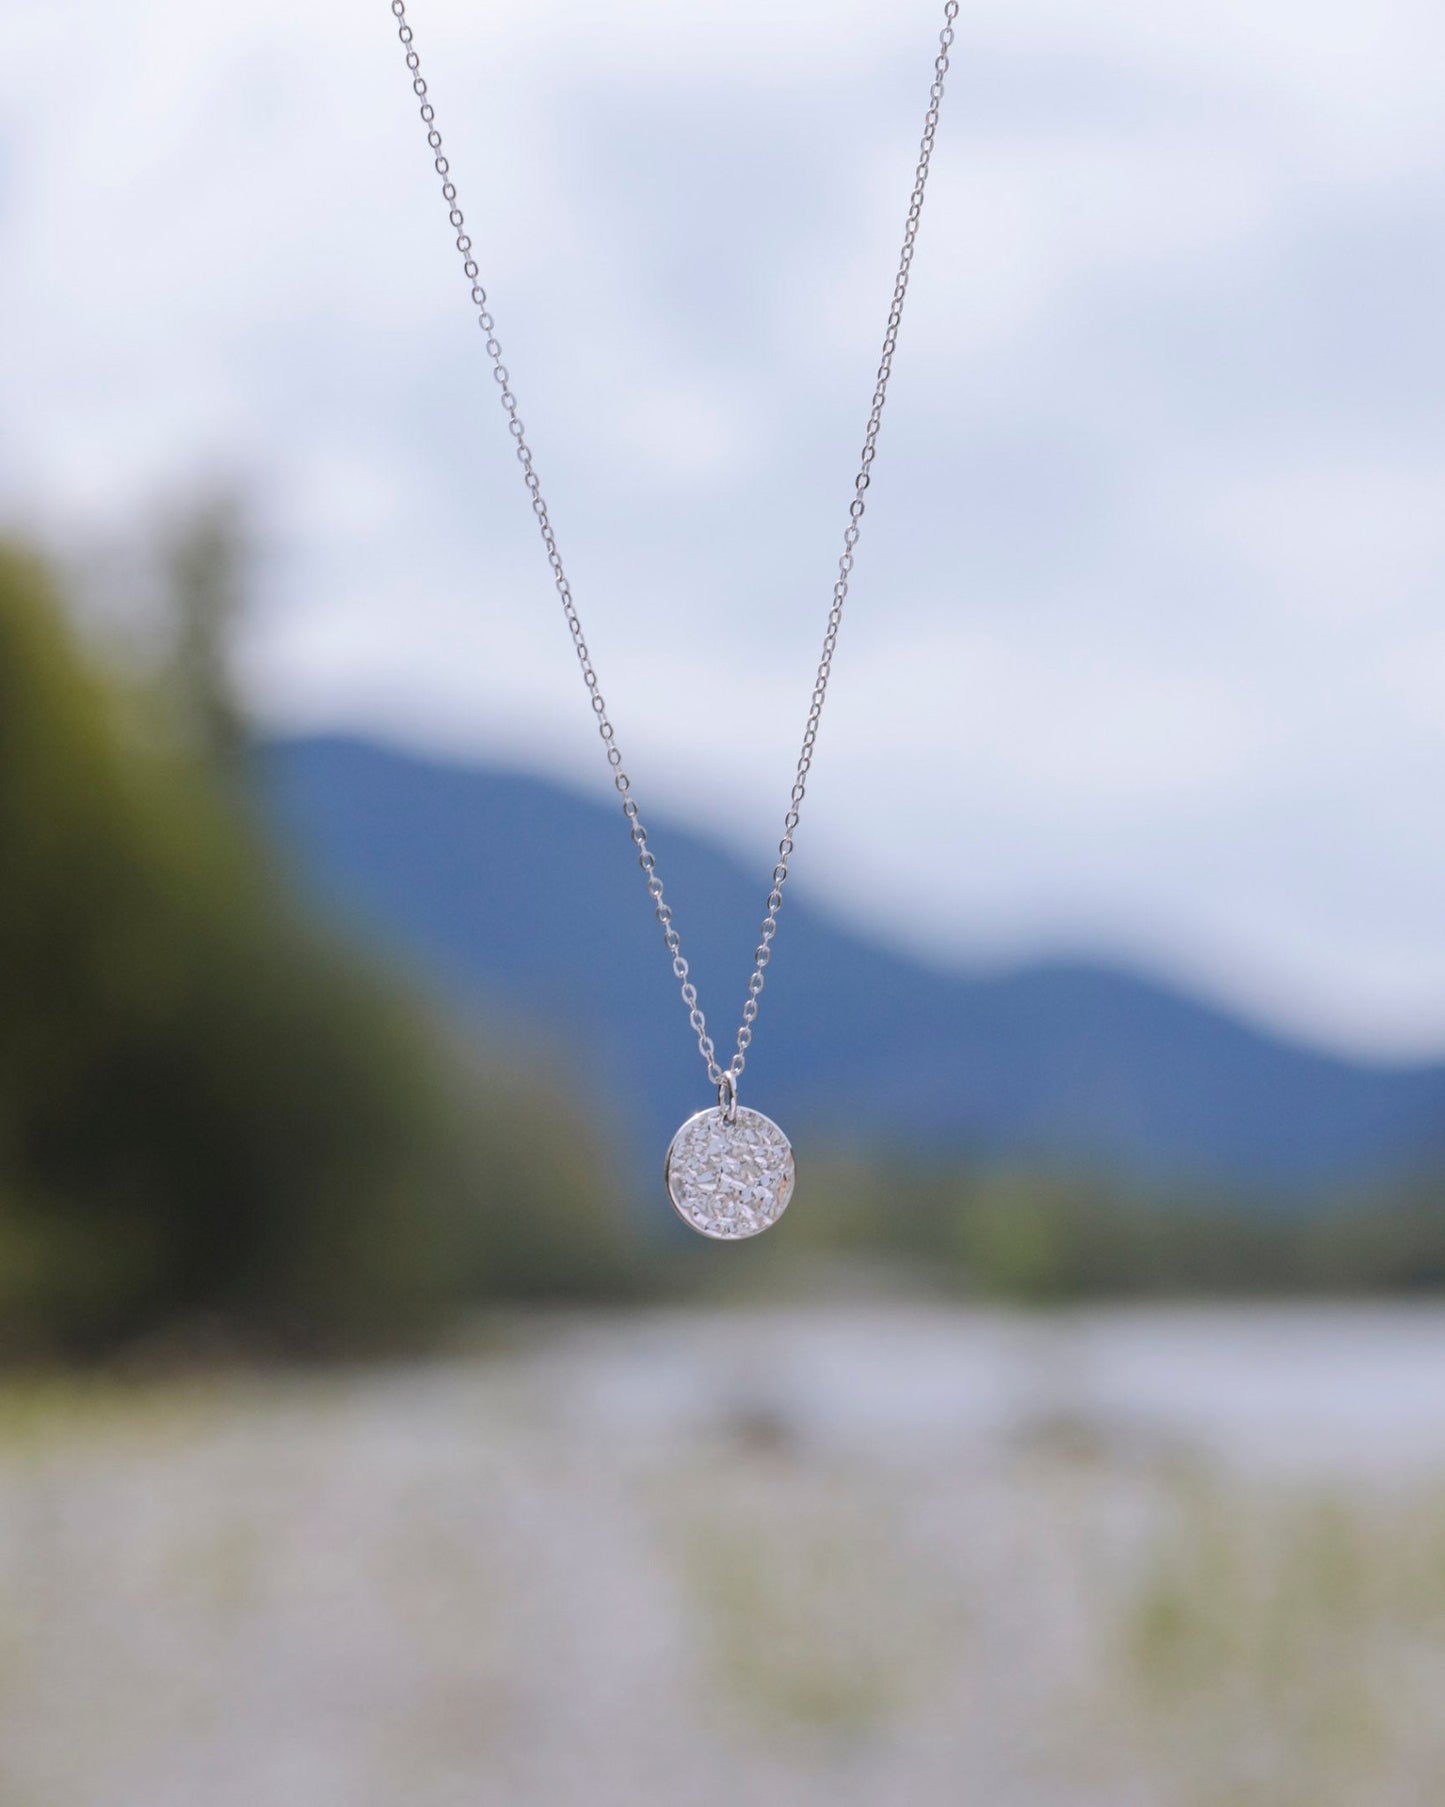 Sterling Silver Sol Textured Small Circle Pendant Necklace on nature blur background - 1